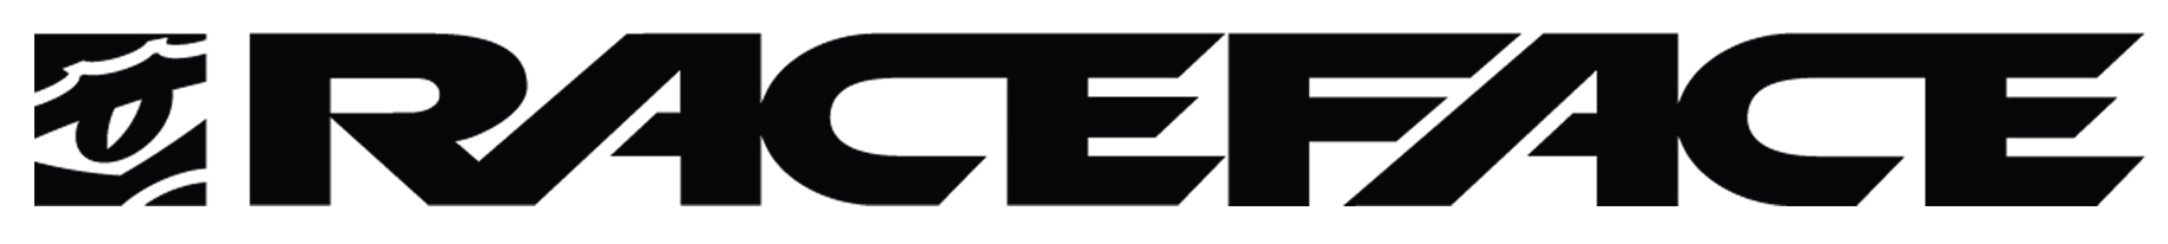 Race Face | SixC, Atlas, Chester Components and Apparel | TPC - The Pro ...